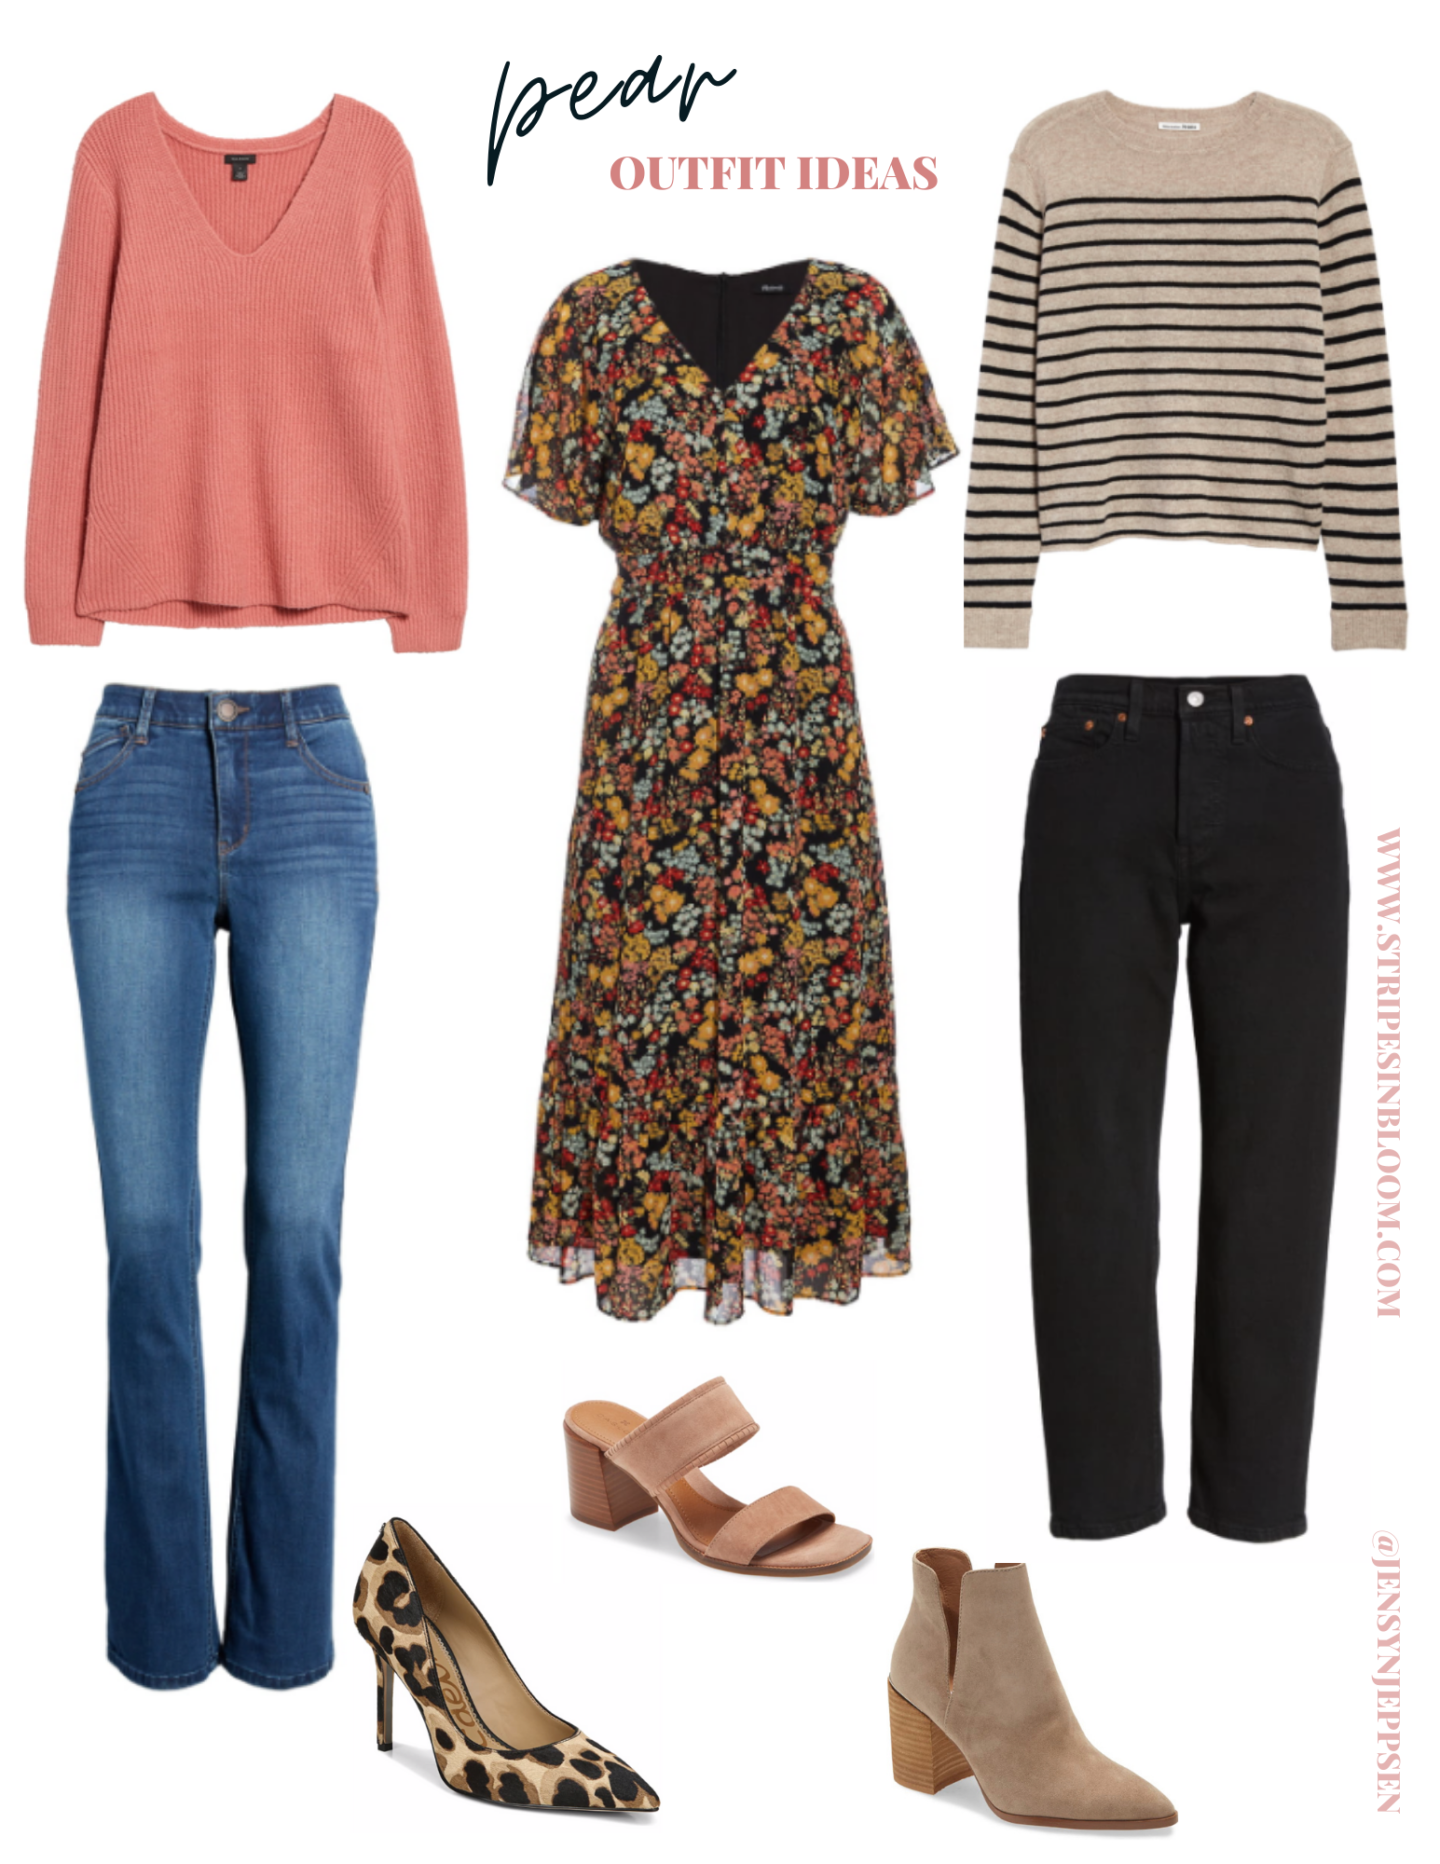 DRESS YOUR BODY TYPE - Stripes in Bloom